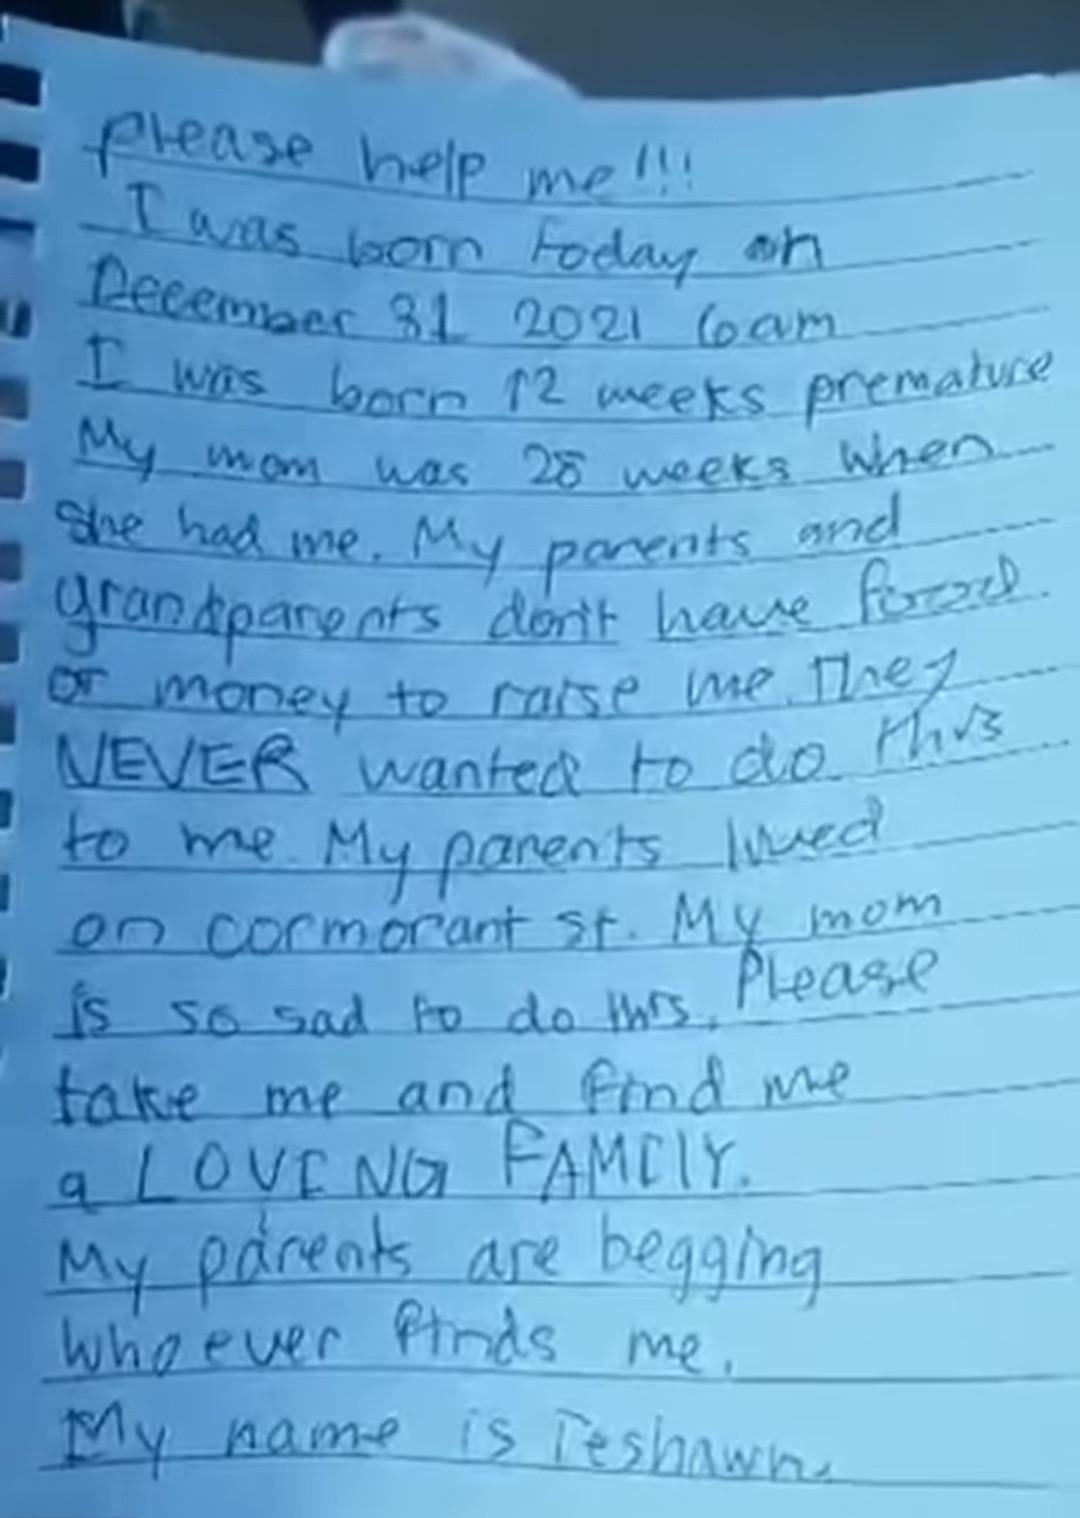 Baby is found abandoned in cardboard box with a note from his mother 